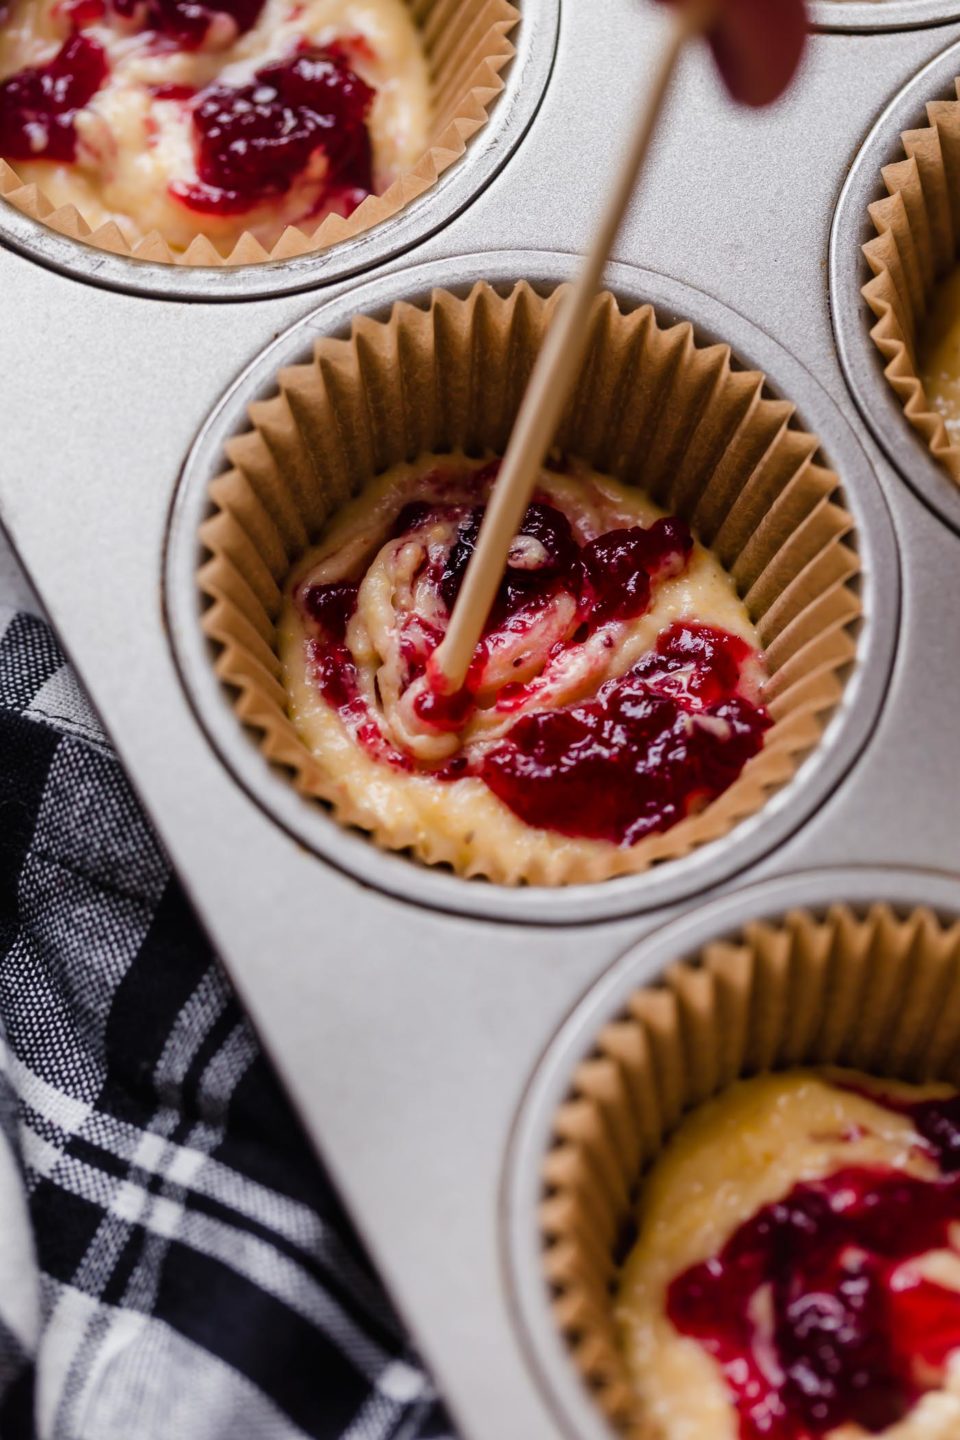 Swirling cranberry sauce into cornbread batter with a toothpick.